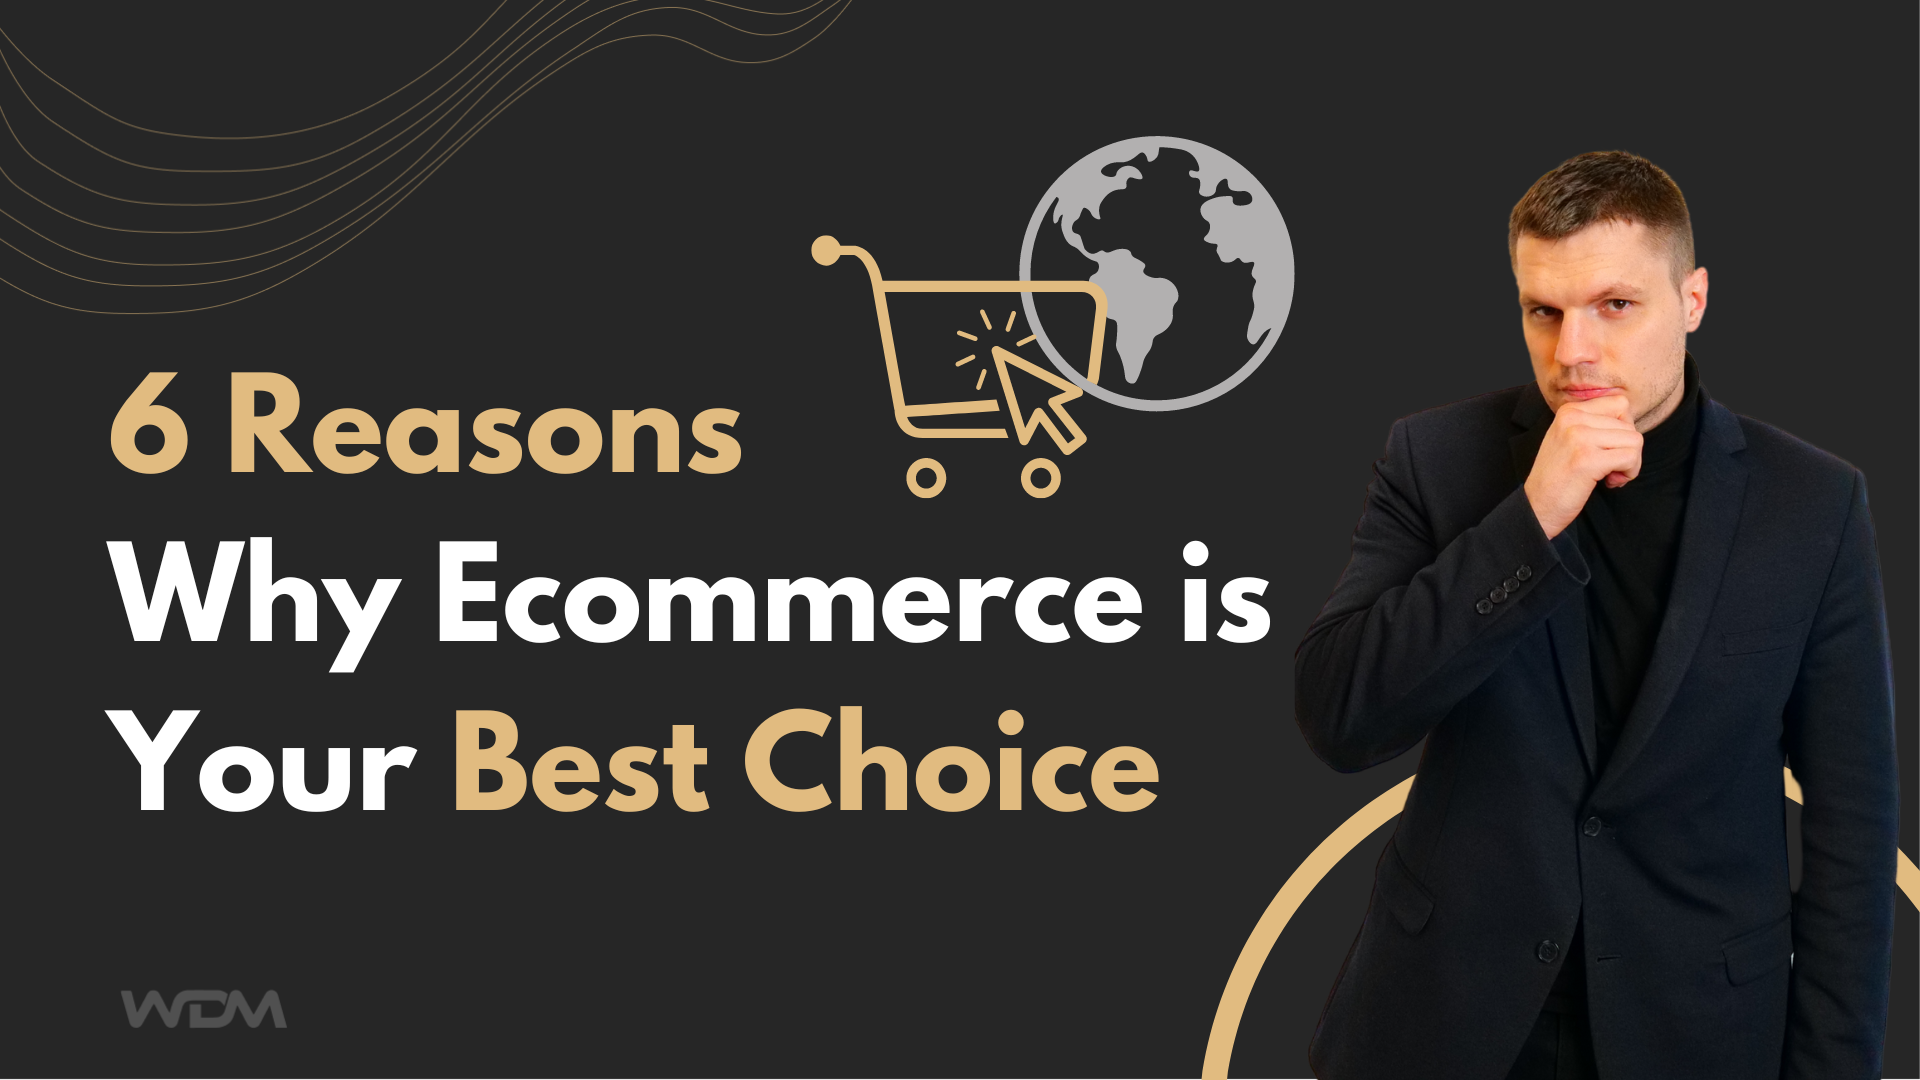 6 Reasons Why Ecommerce is Your Best Choice